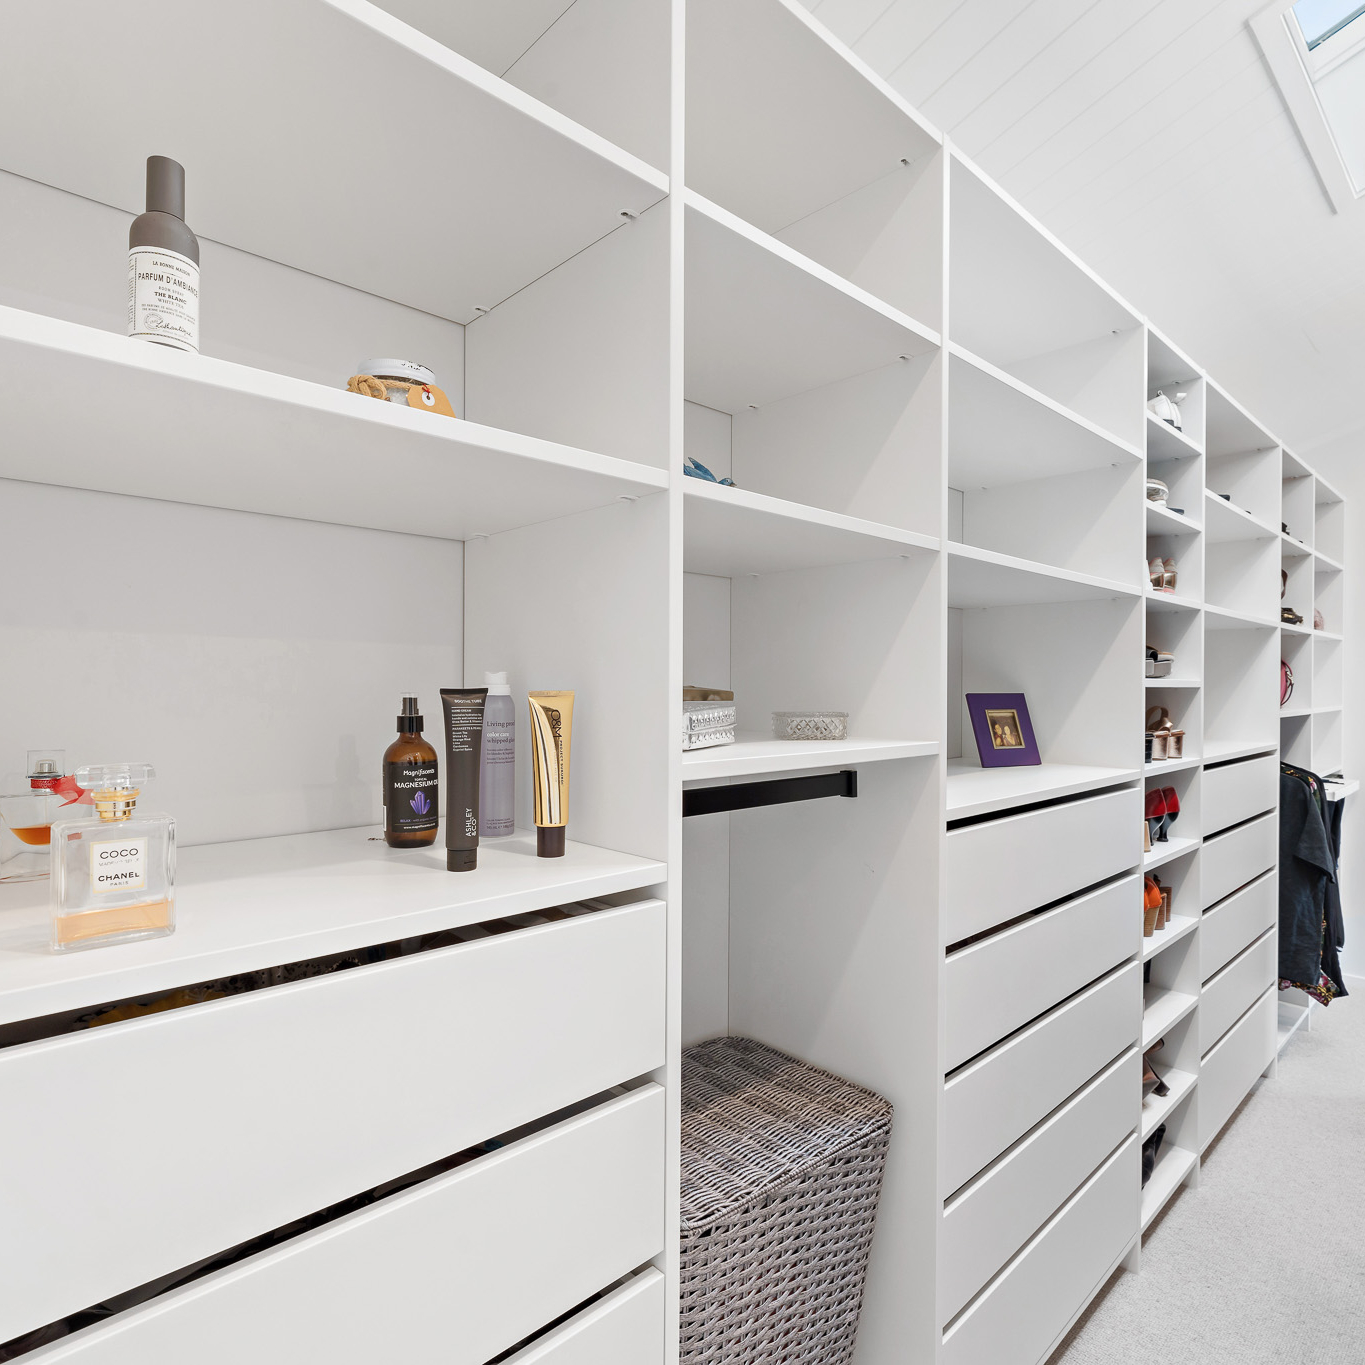 White Flex wardrobe organiser walk-in, you can see 3 drawer towers, a shoe tower, and some perfume and makeup bottles on the shelf